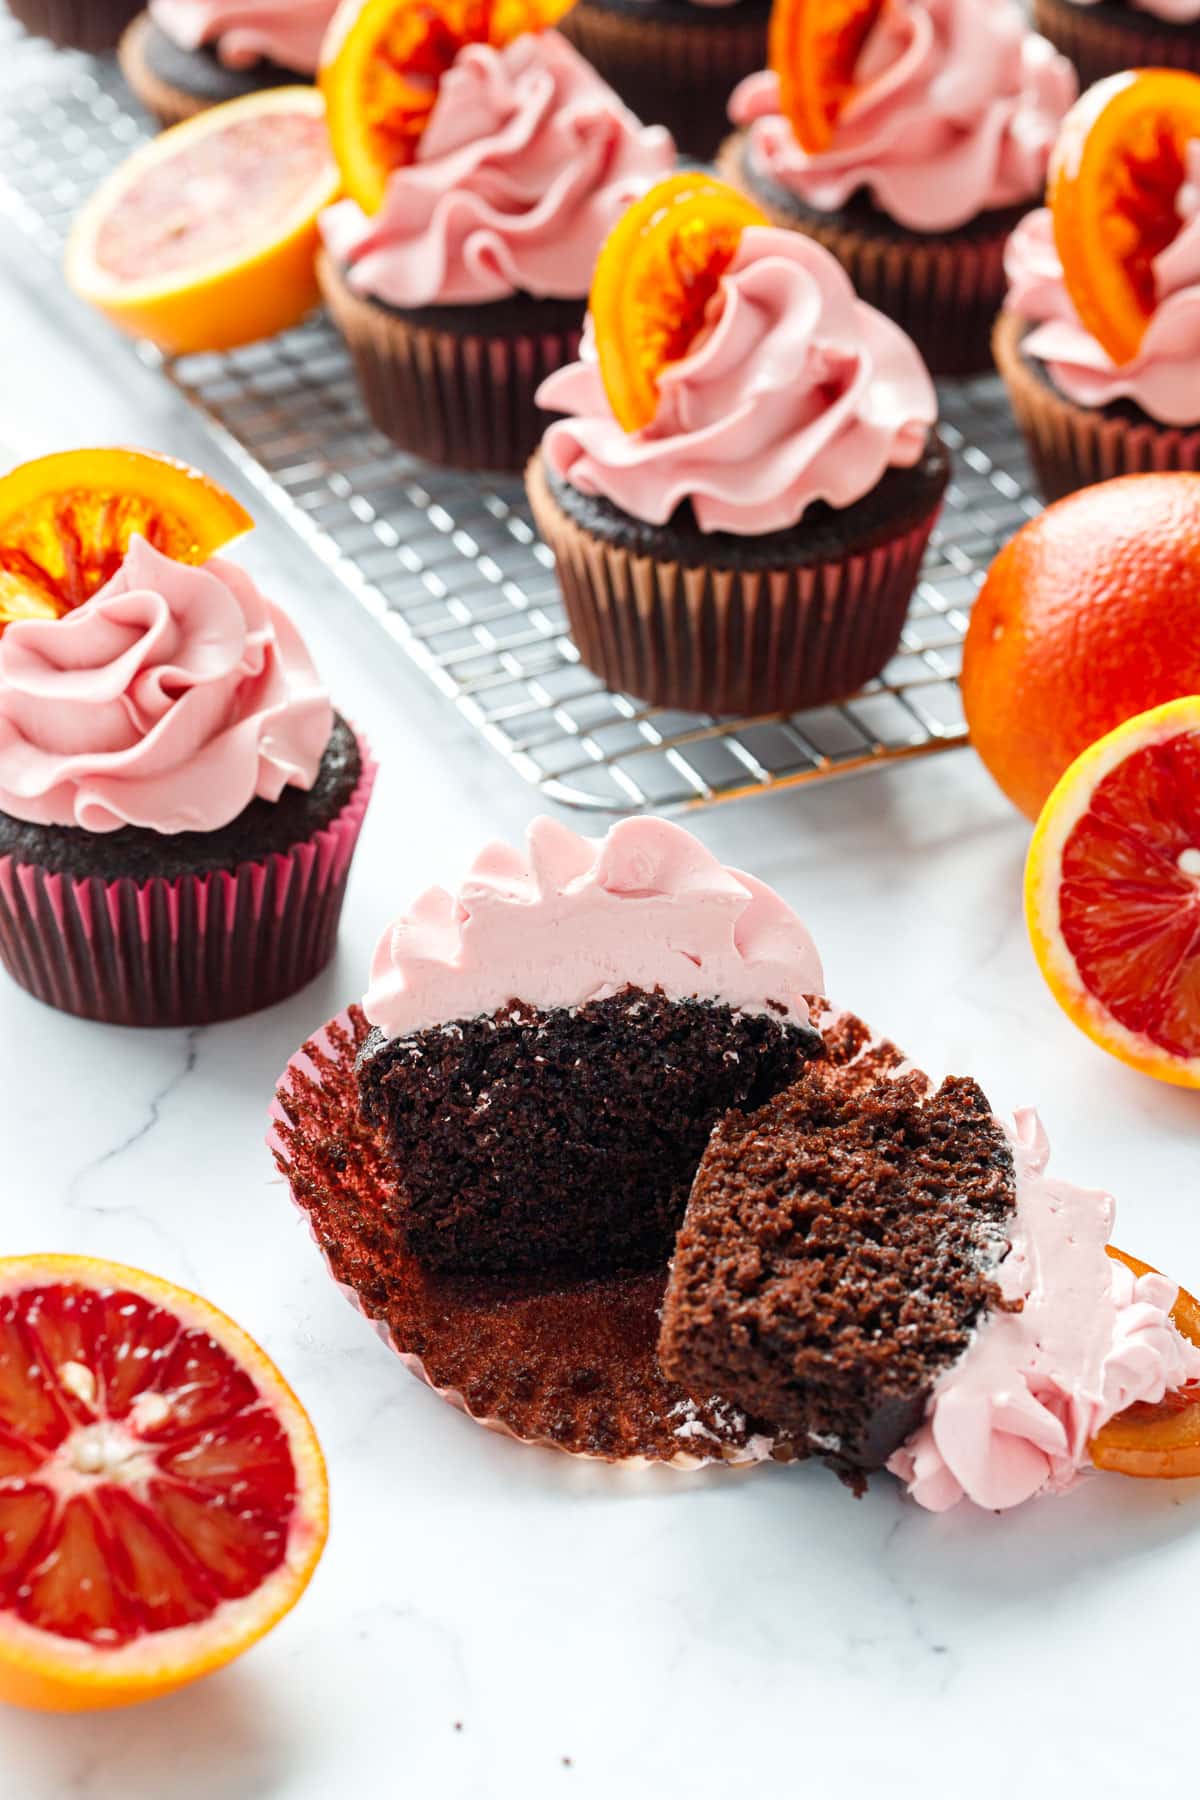 One Chocolate Olive Oil & Blood Orange Cupcake cut in half to show the interior texture of the chocolate cupcake, with a few more cupcakes and some cut blood oranges surrounding it.